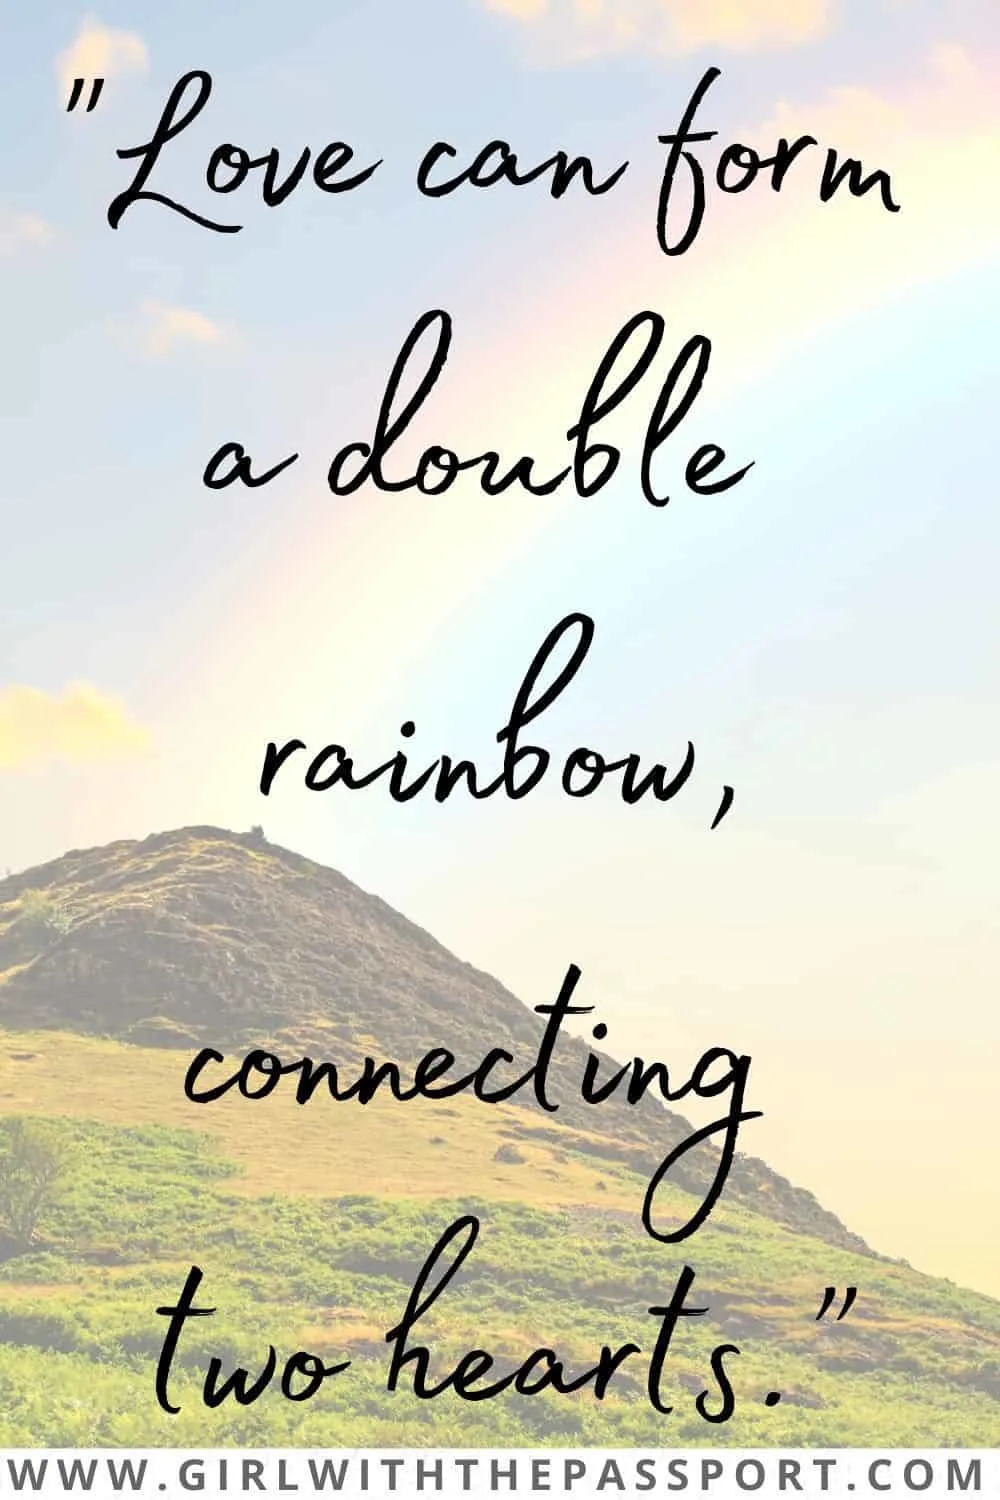 Best Rainbow Love Quotes and Rainbow Phrases about Love